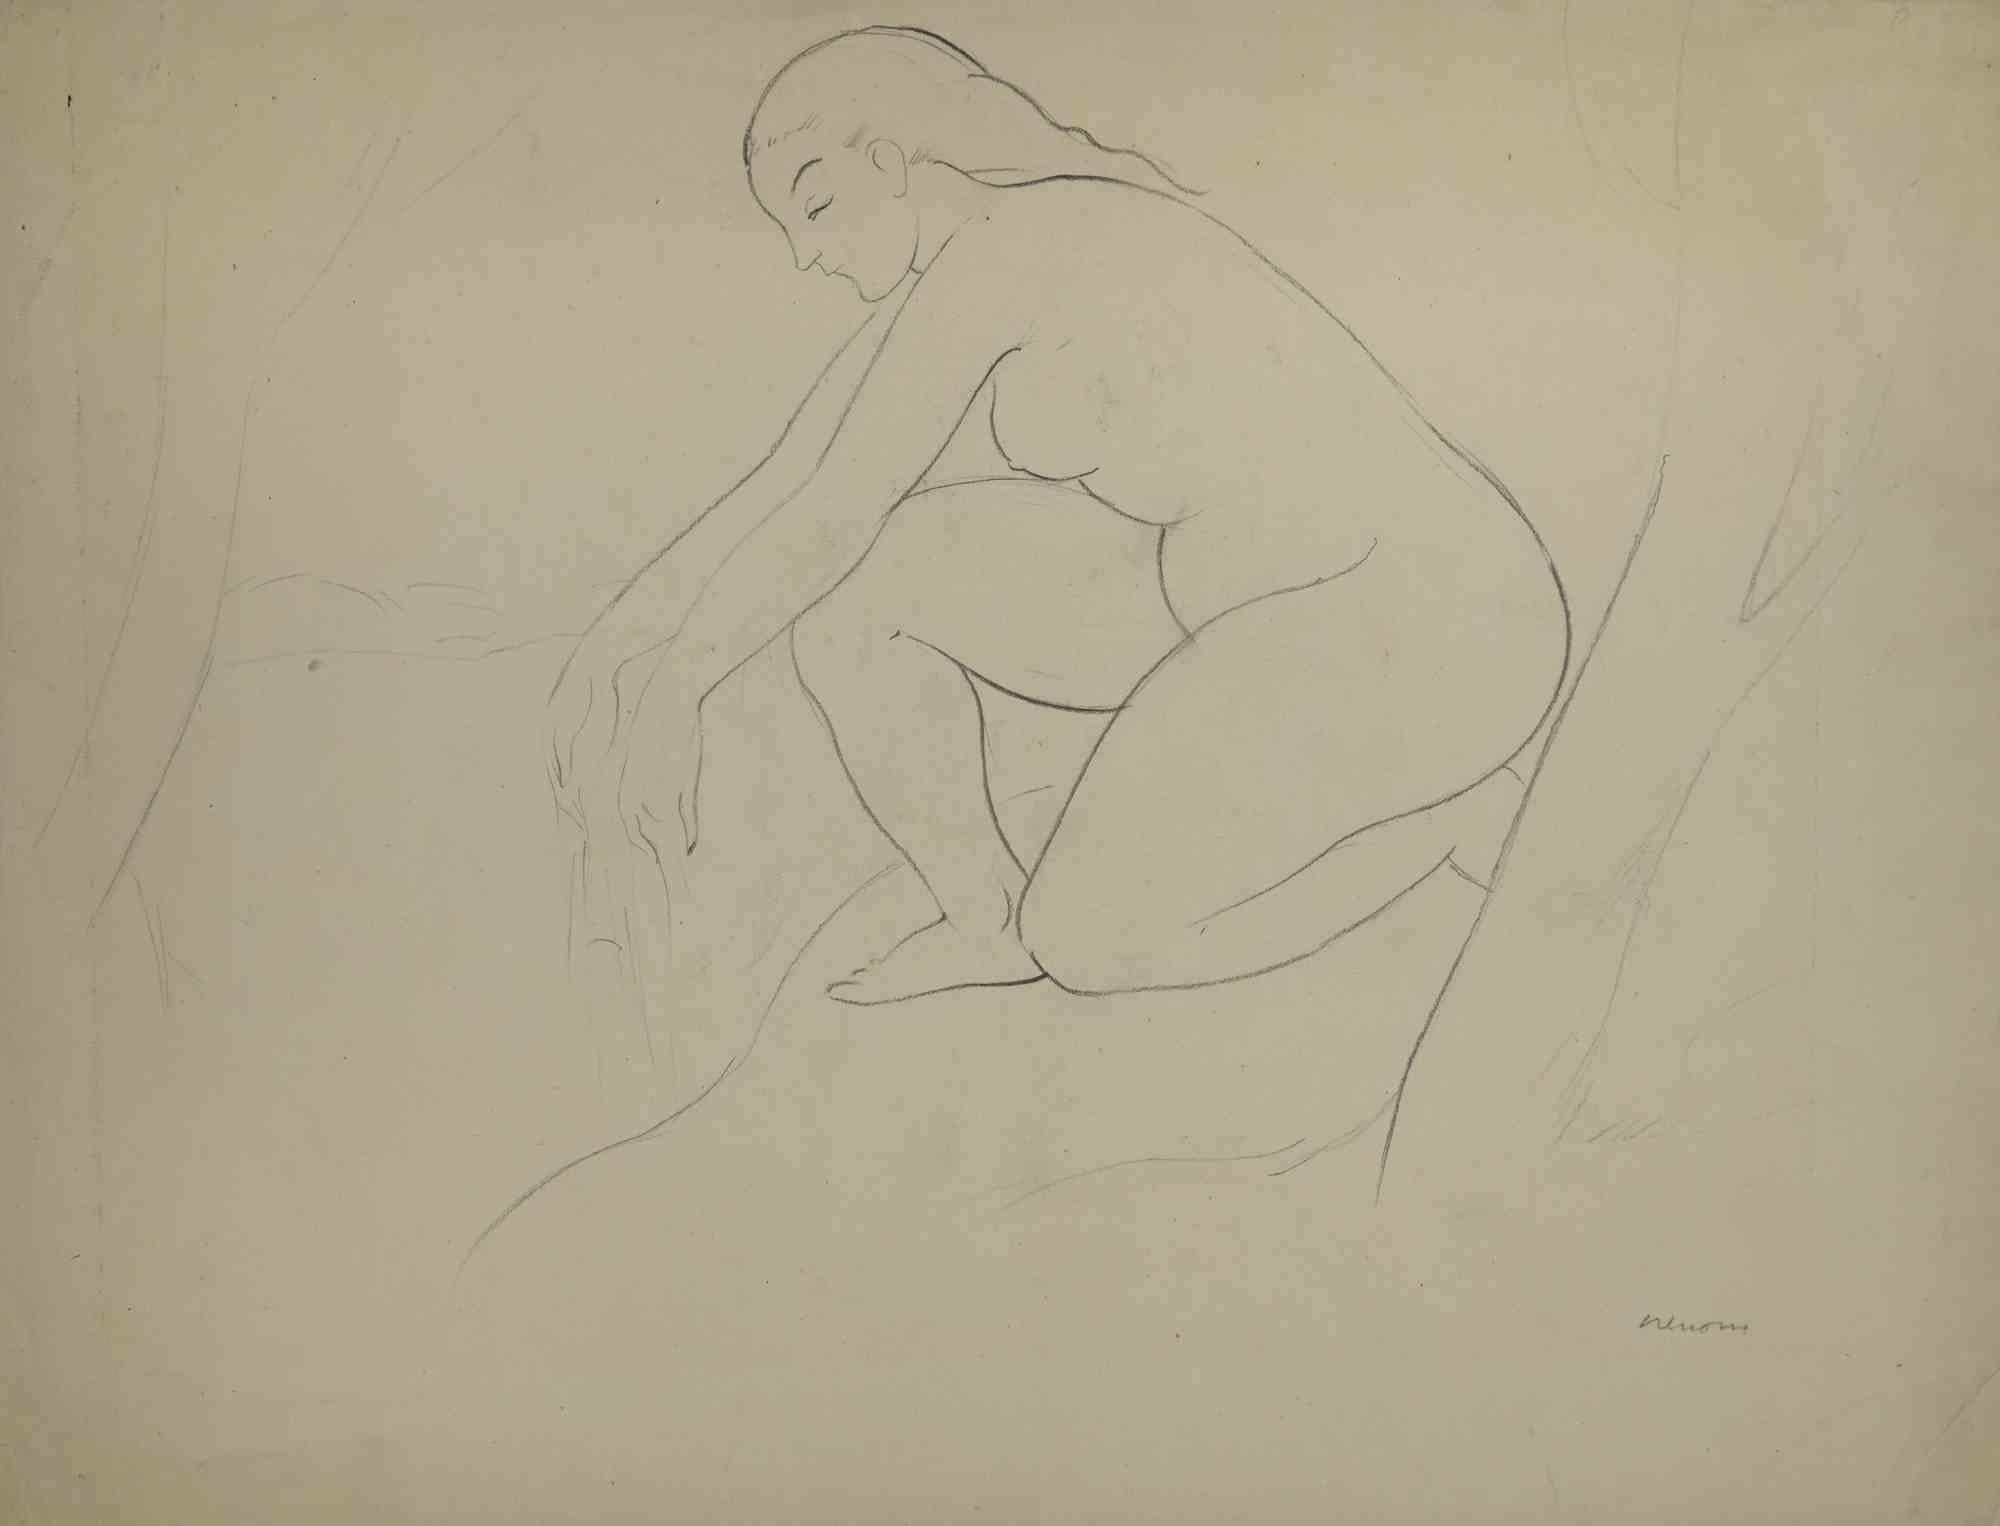 Untitled is  an artwok realized by the Spanish Artist Miquel Renom (1912-1984) .

Drawing on paper. Hand Signed on the right corner.

The artist wants to define a well-balanced composition, through preciseness and congruous B./W. colors.

Good